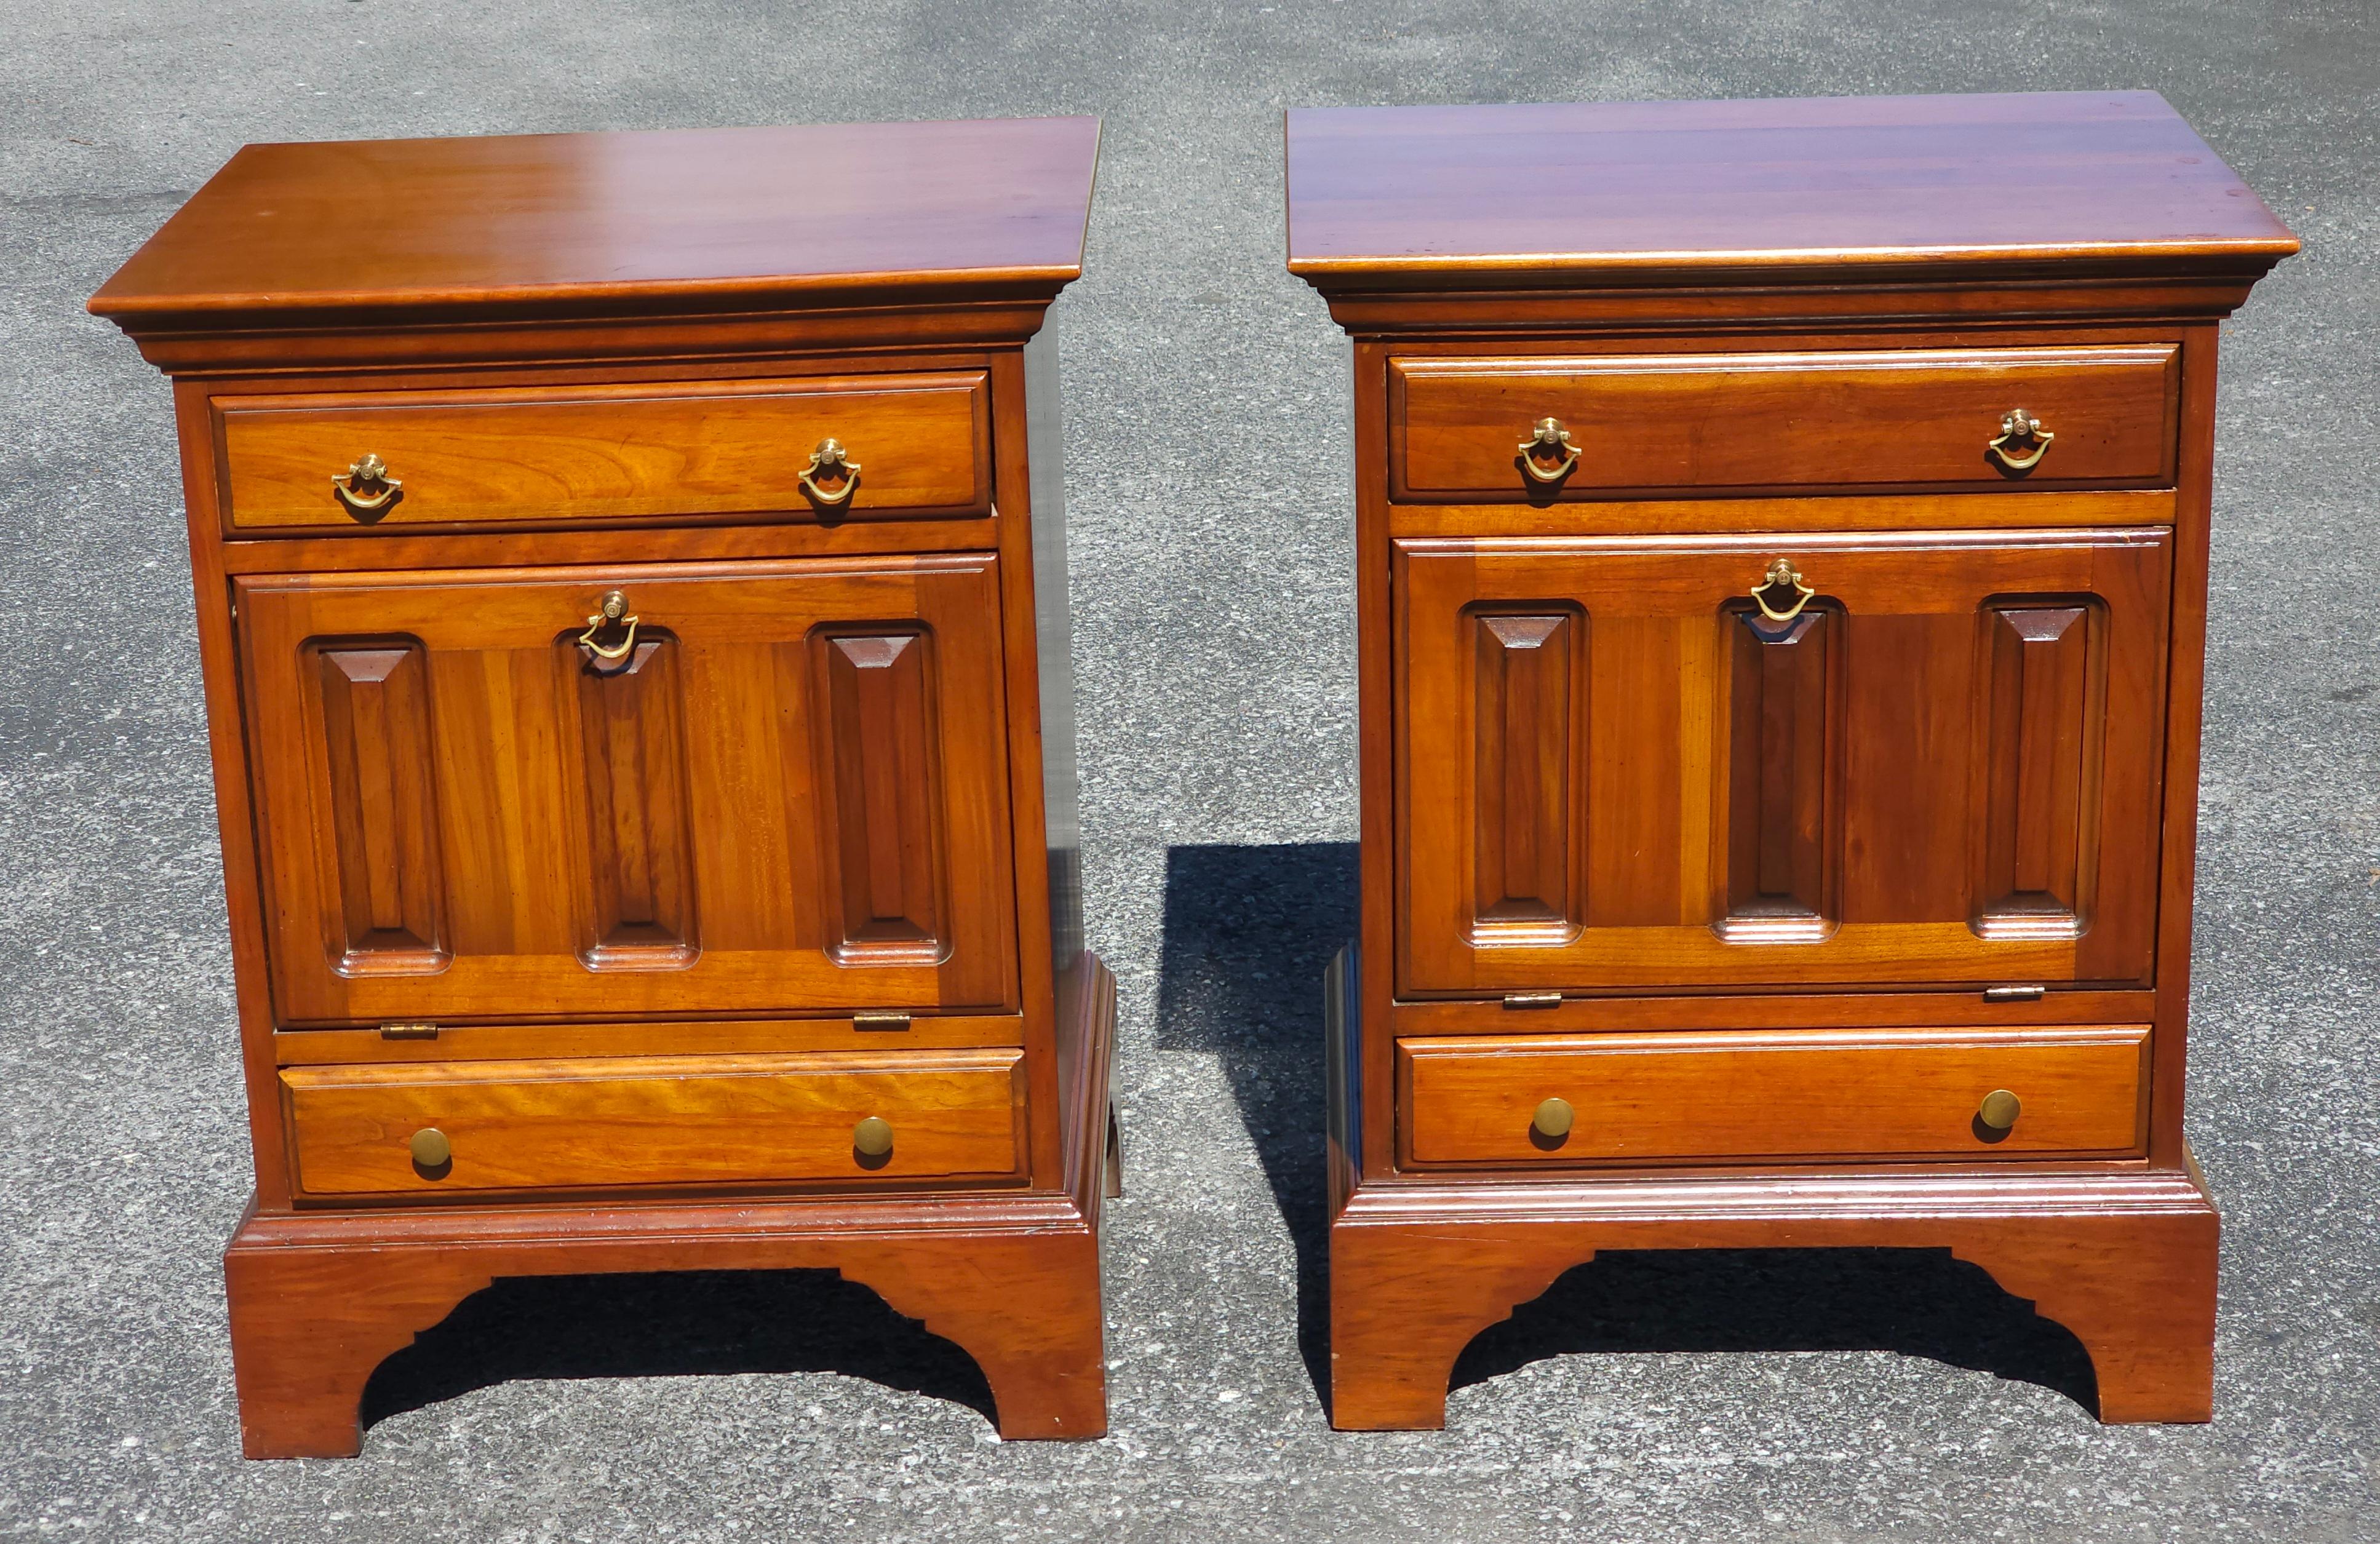 20th Century David Cabinet Cherry 2-Drawer a Abattant Door Bedside Cabinets Pair In Good Condition For Sale In Germantown, MD